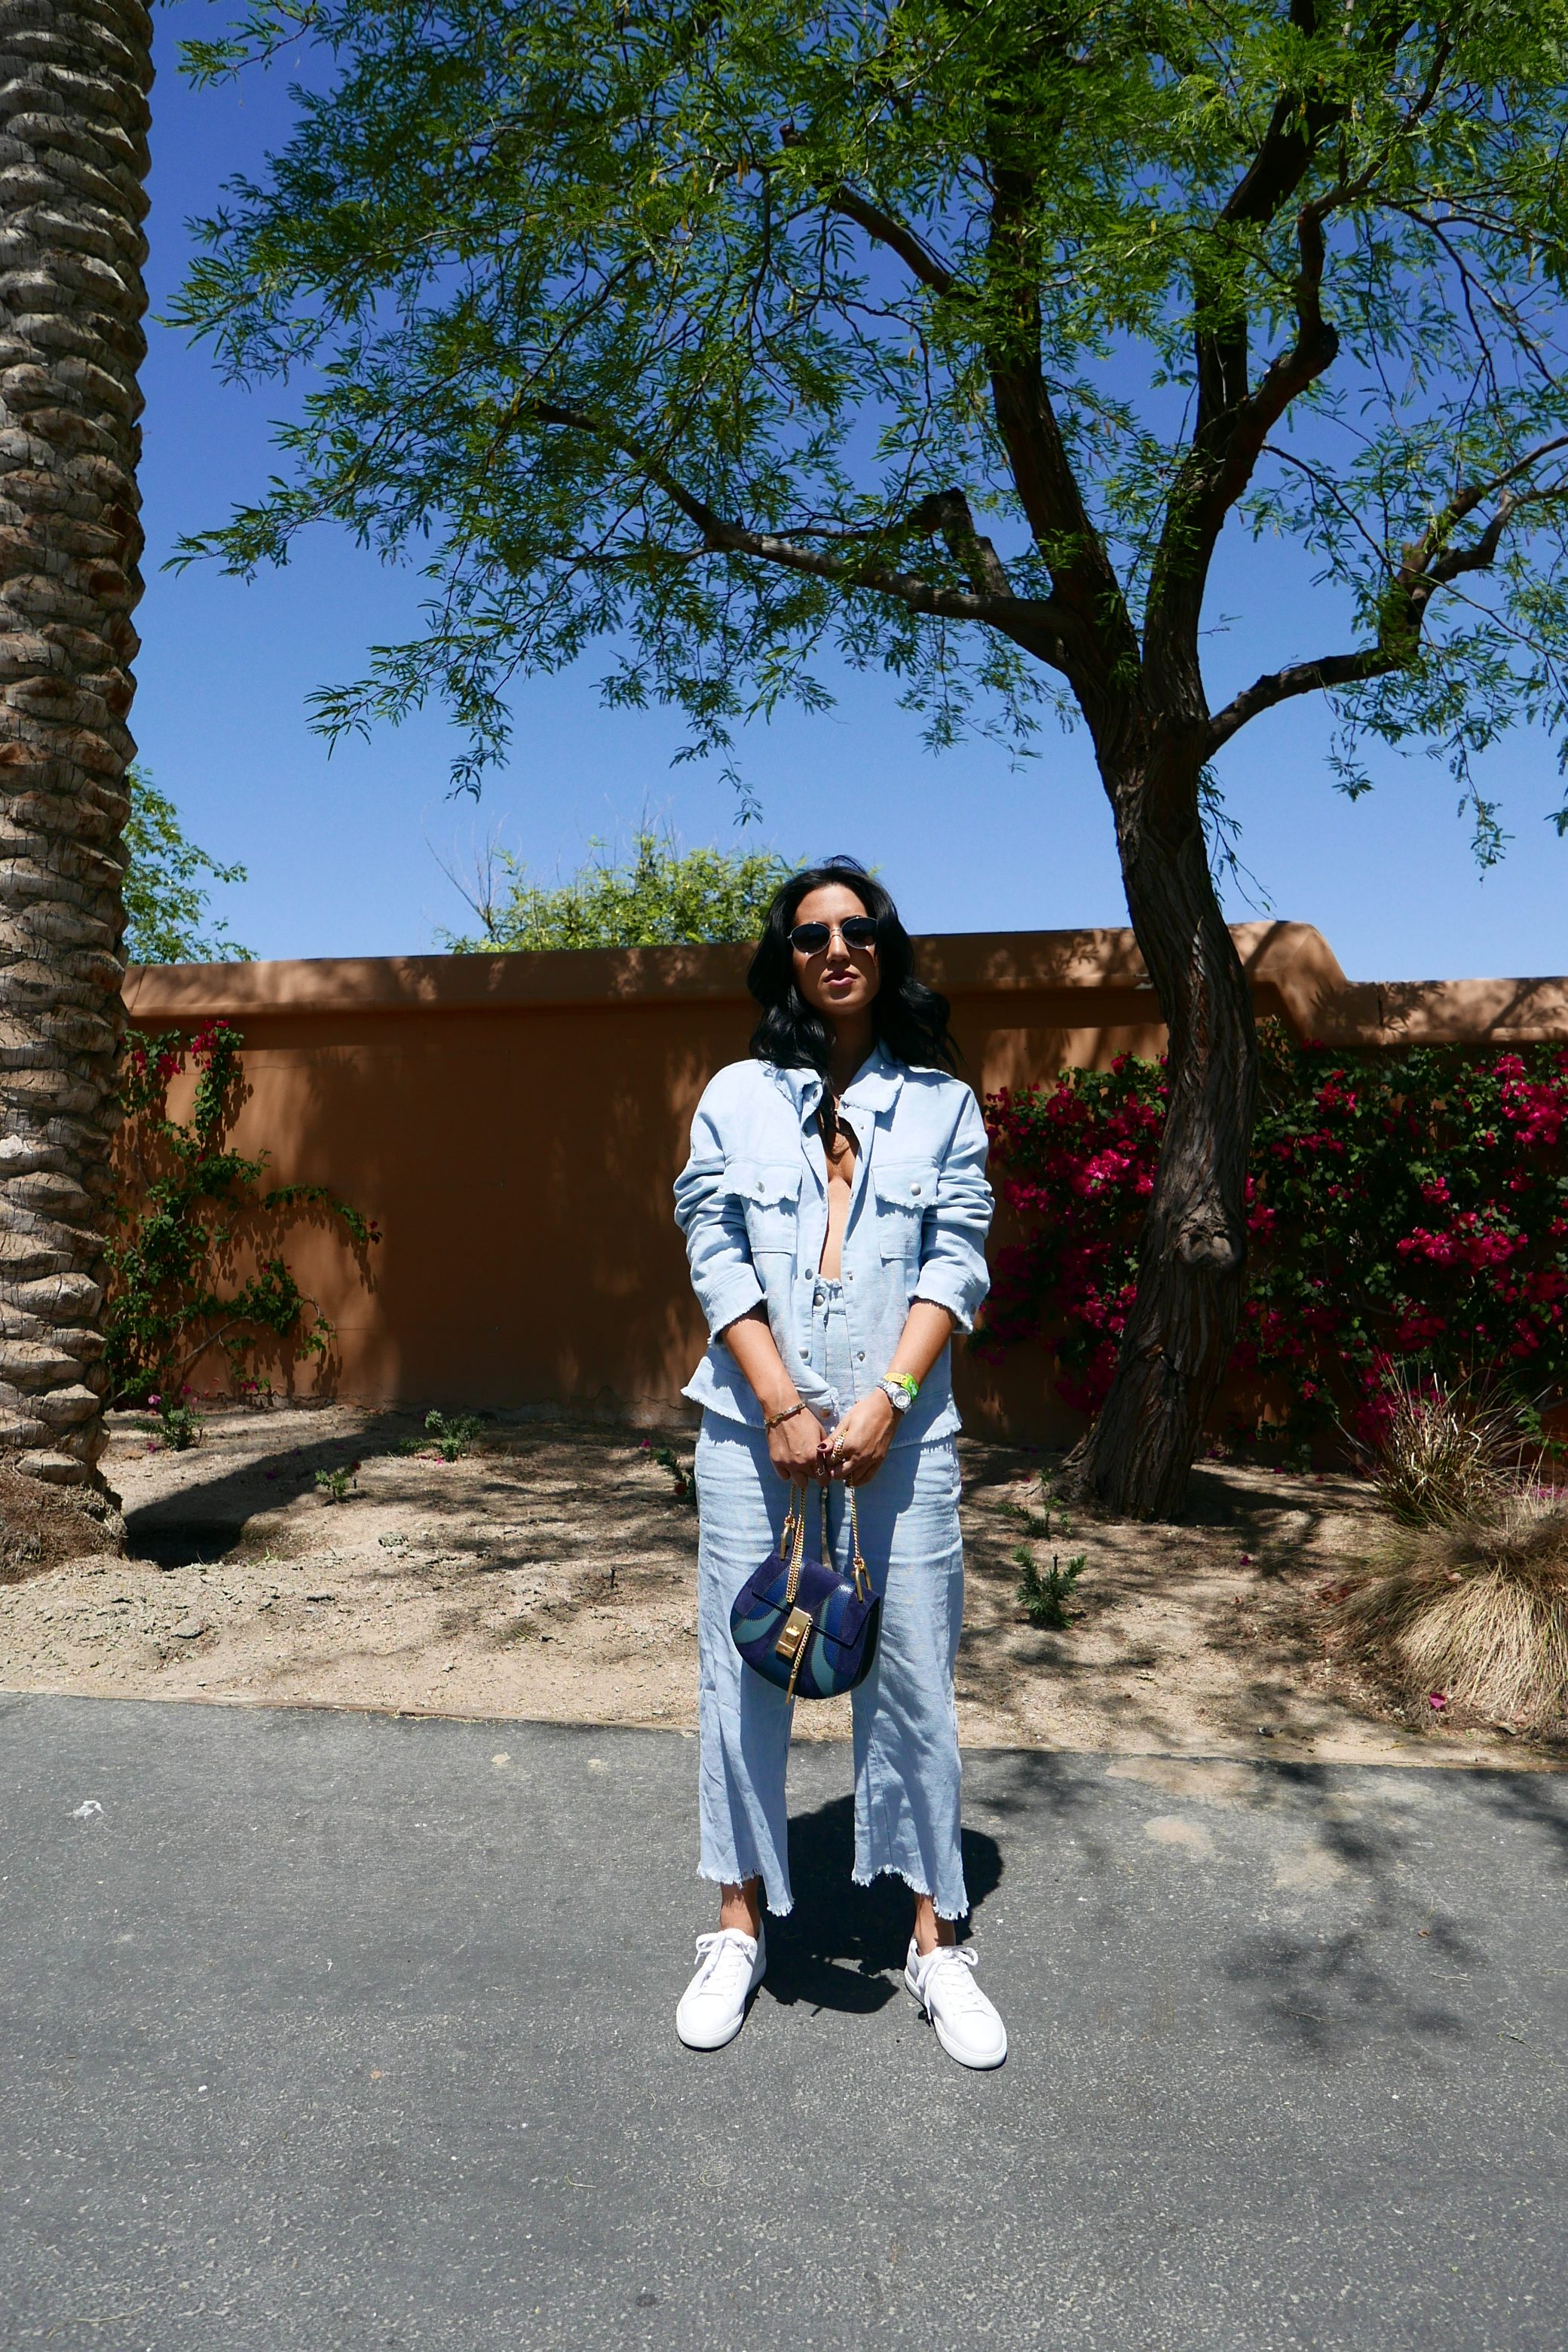 LA Blogger Tania Sarin on coachella weekend featuring festival style with moonriver two piece set and navy chloe crossbody bag